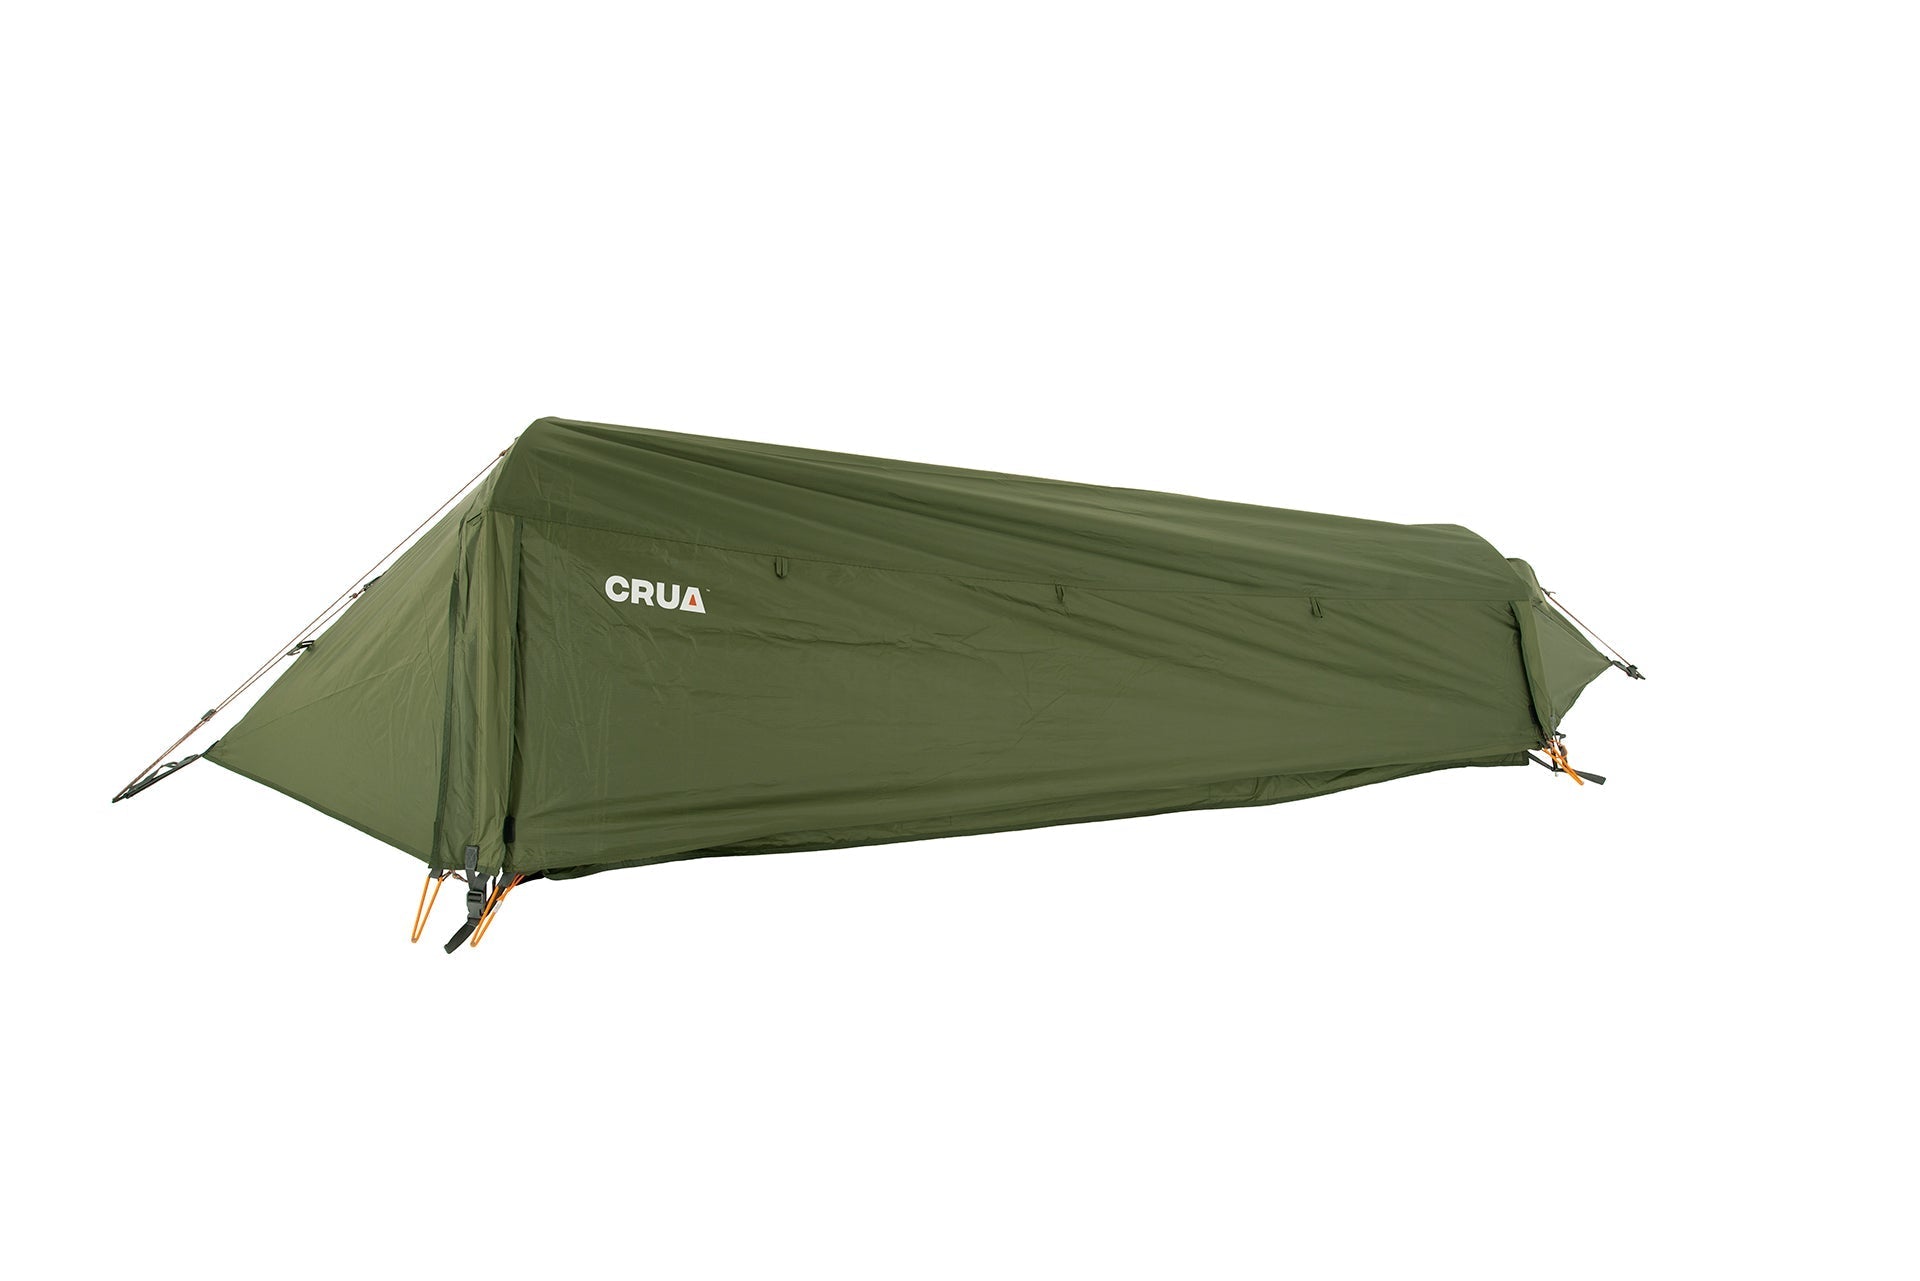 Crua Outdoors - HYBRID | 1 PERSON BIVVY/HAMMOCK WATERPROOF TENT FOR OUTDOOR COMFORT - Angler's Pro Tackle & Outdoors